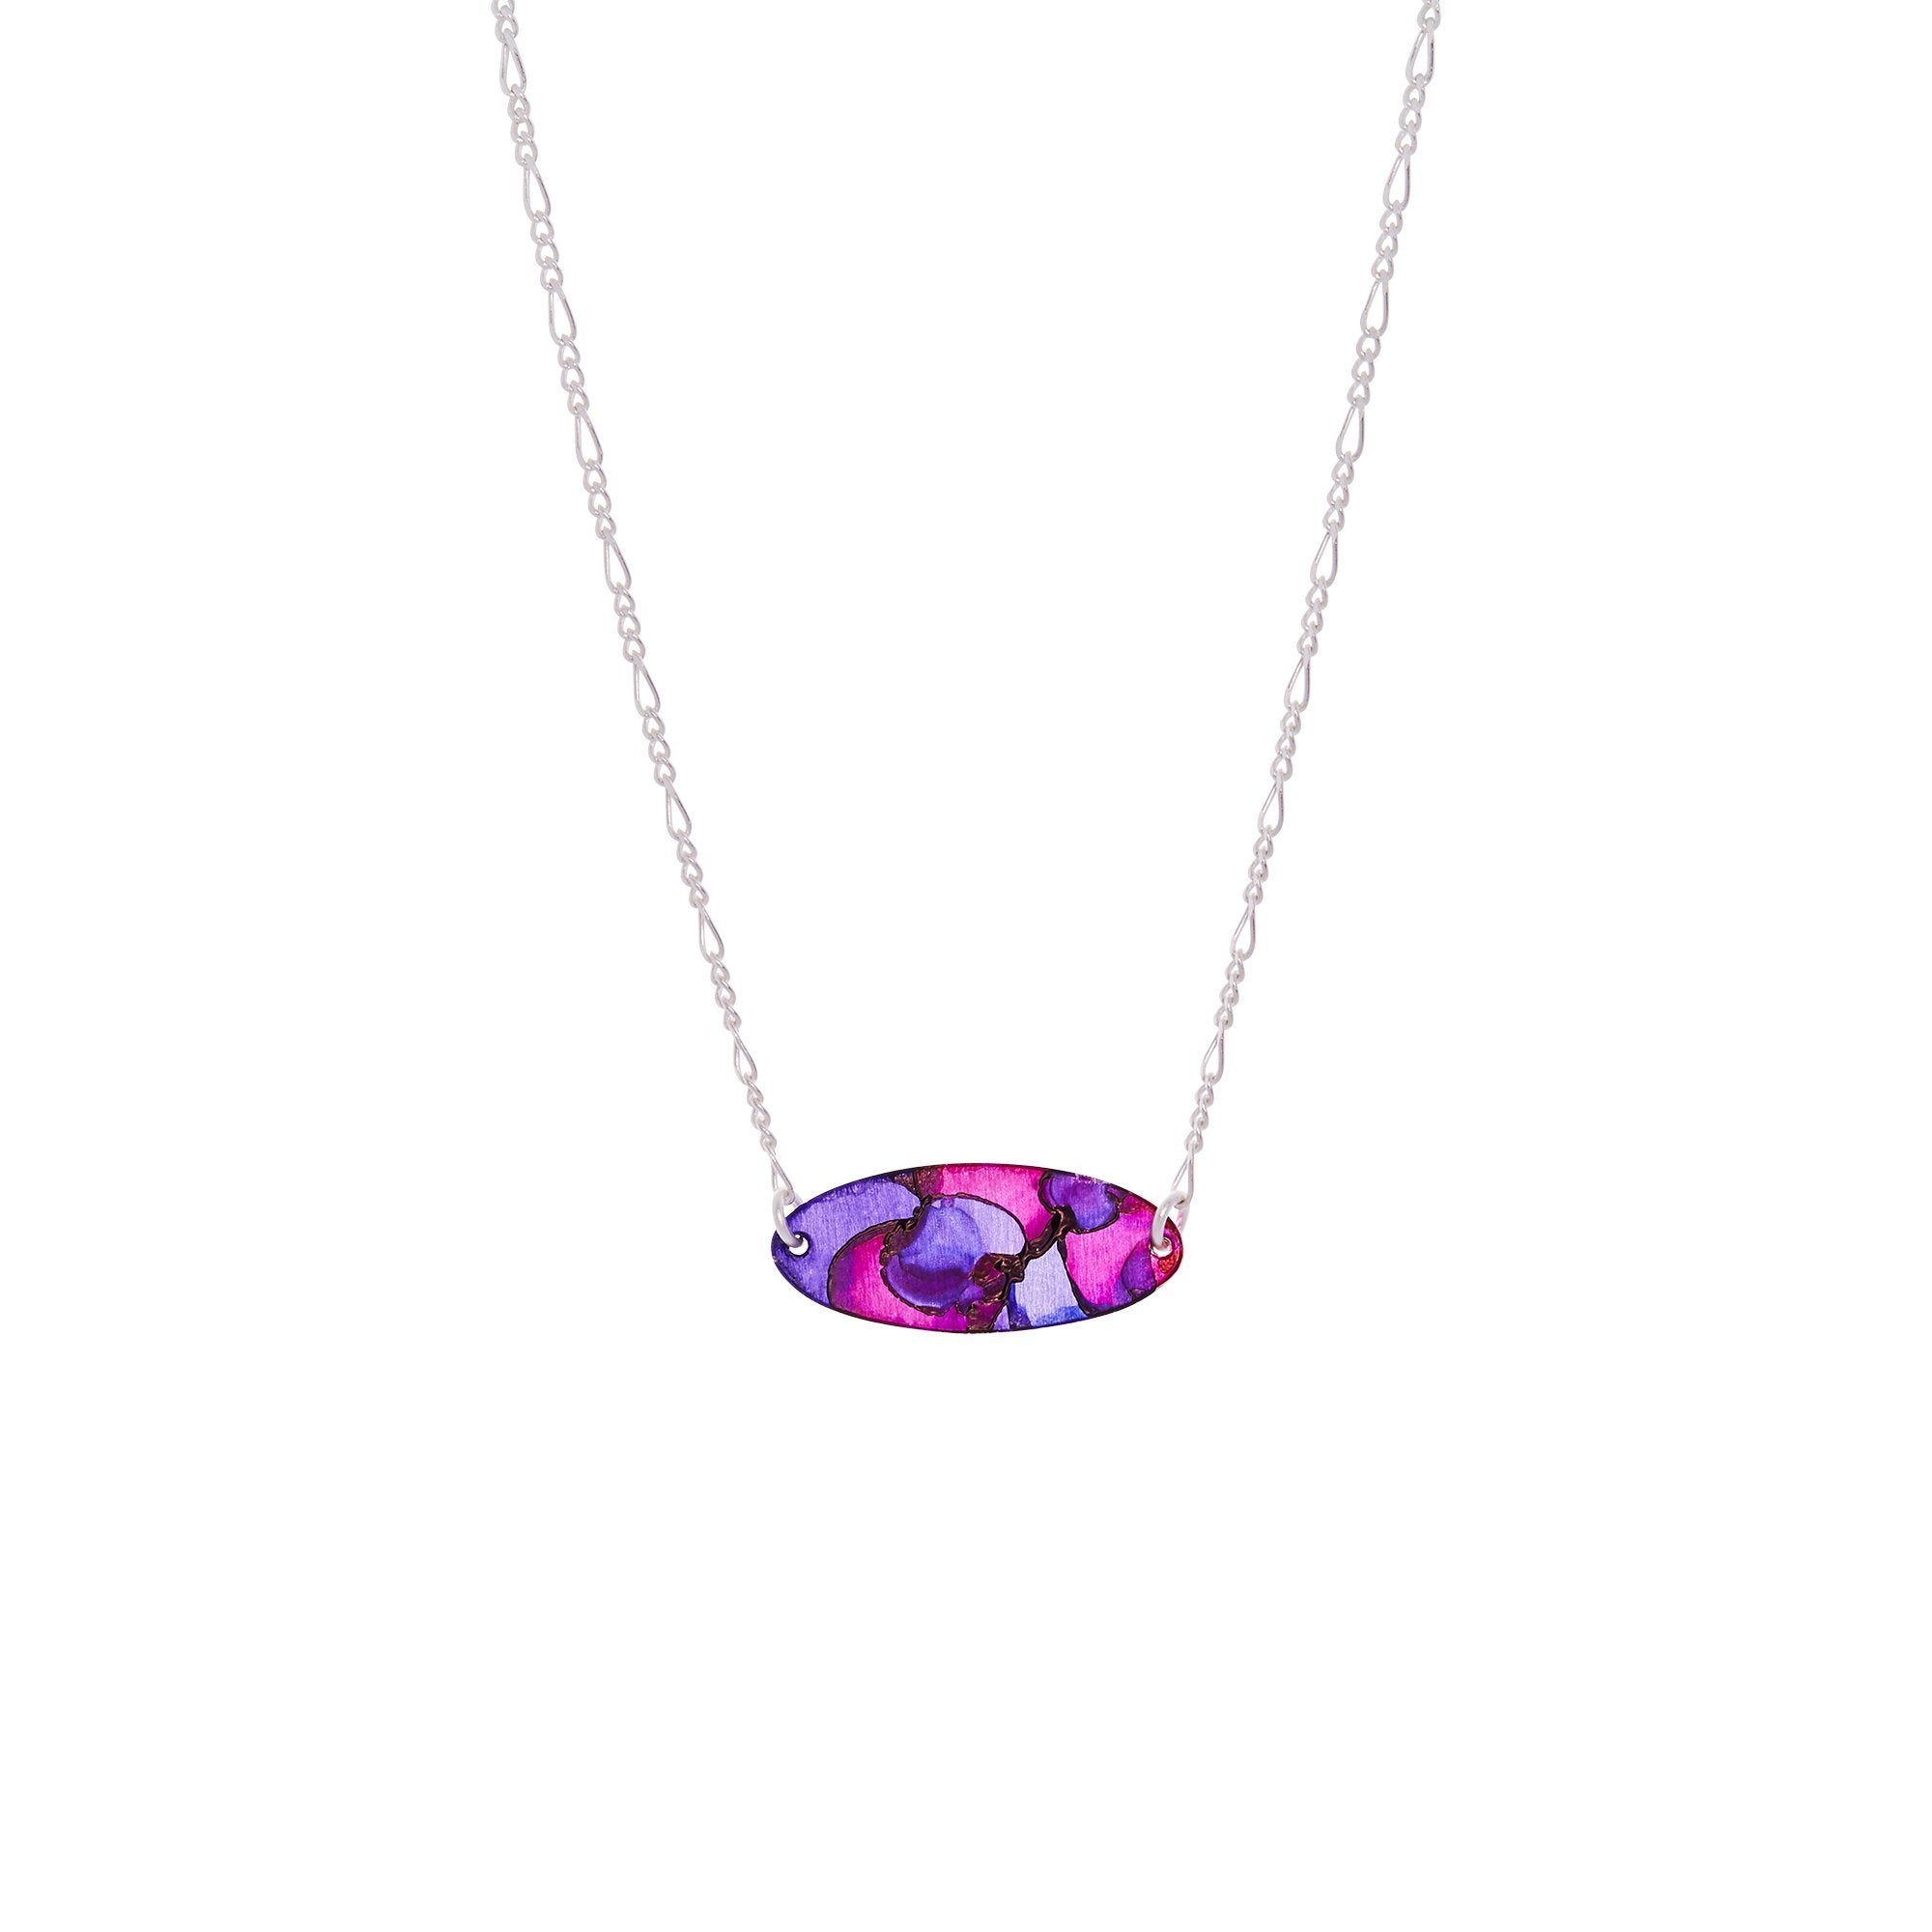 Silver Mini Oval Pendant - Available in More Colors